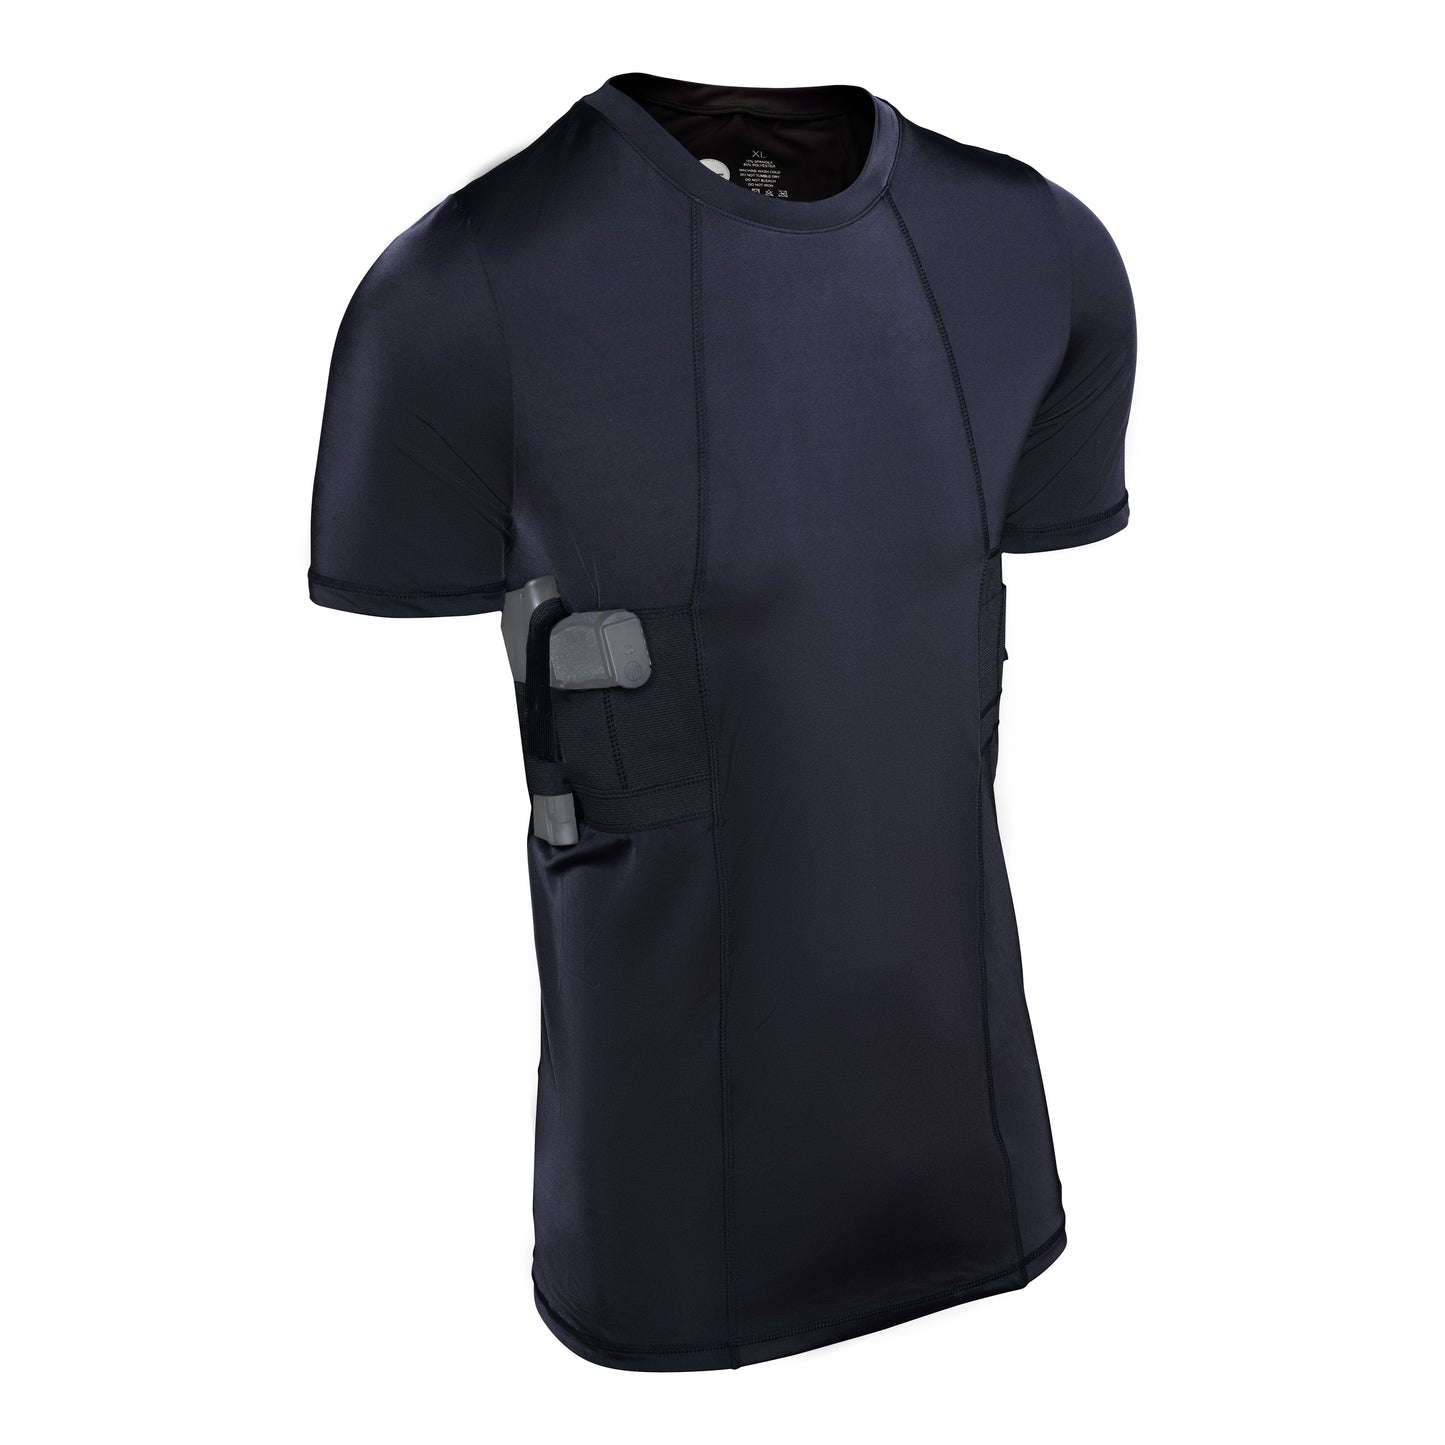 GrayStone Holster Shirt Concealed Men's Crew Neck - Easy Reach Gun Concealment Compression CCW